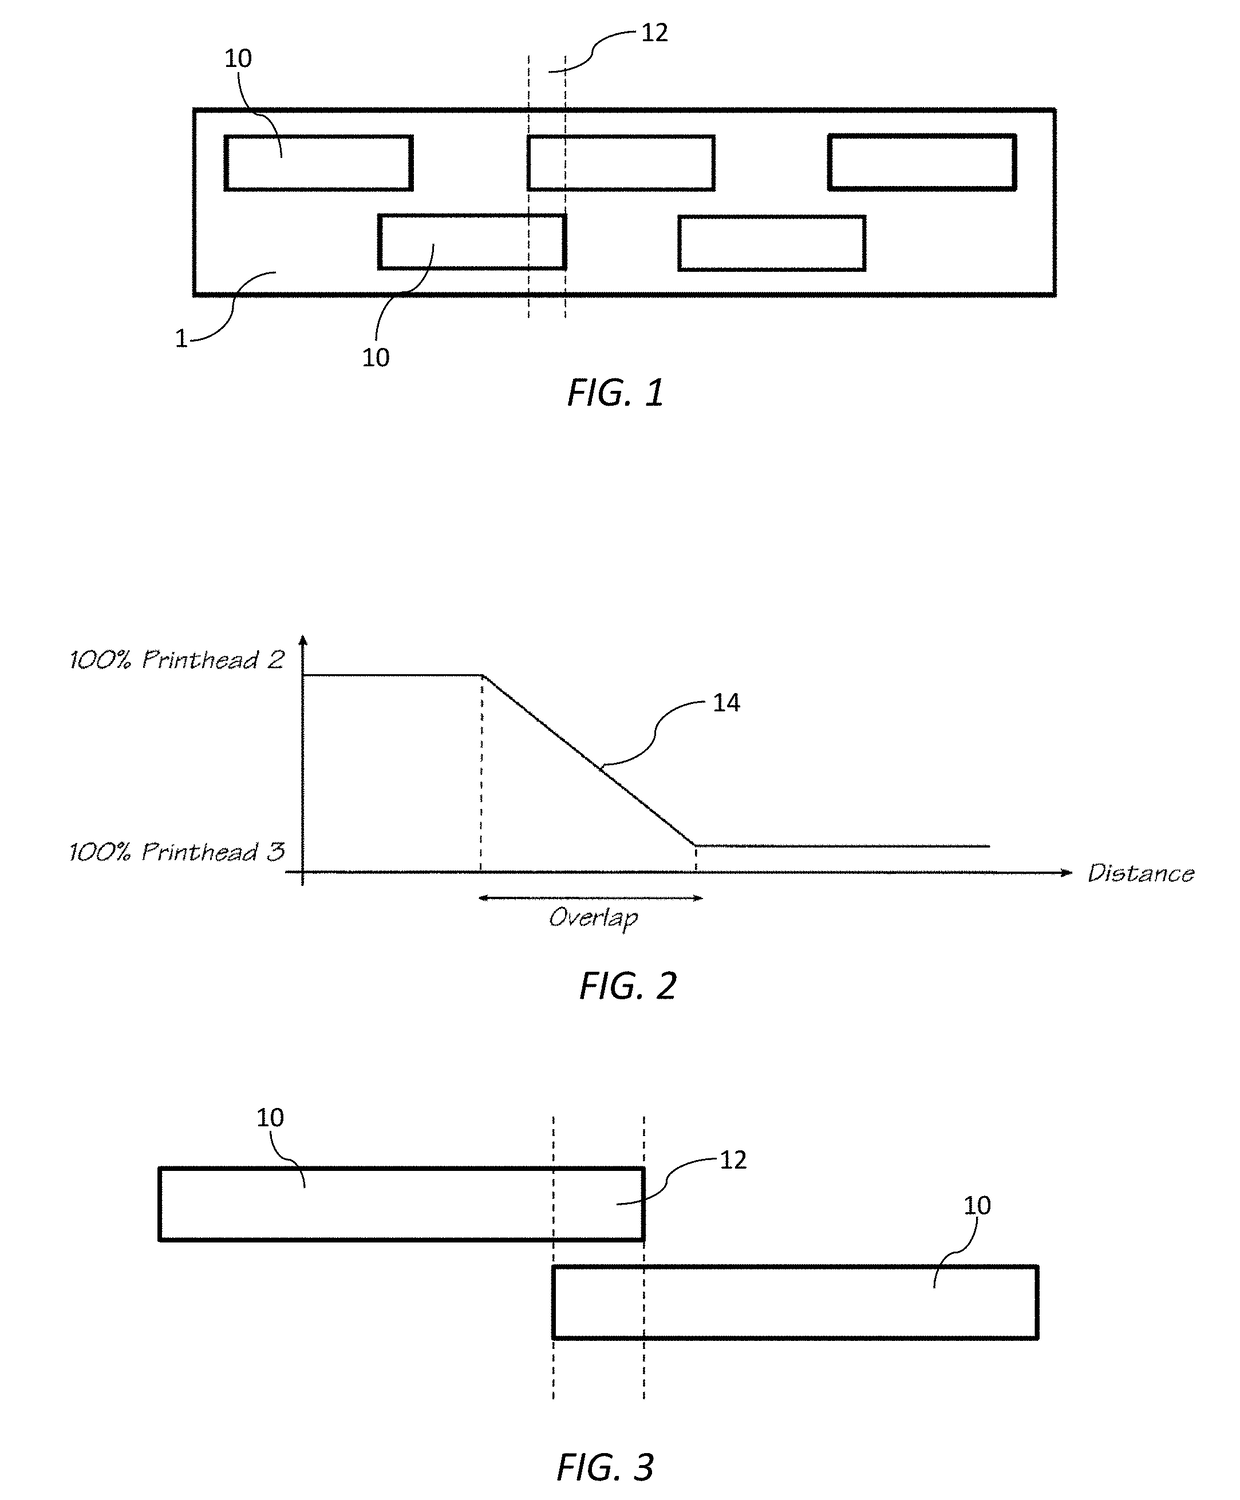 Method of minimizing stitching artifacts for overlapping printhead segments